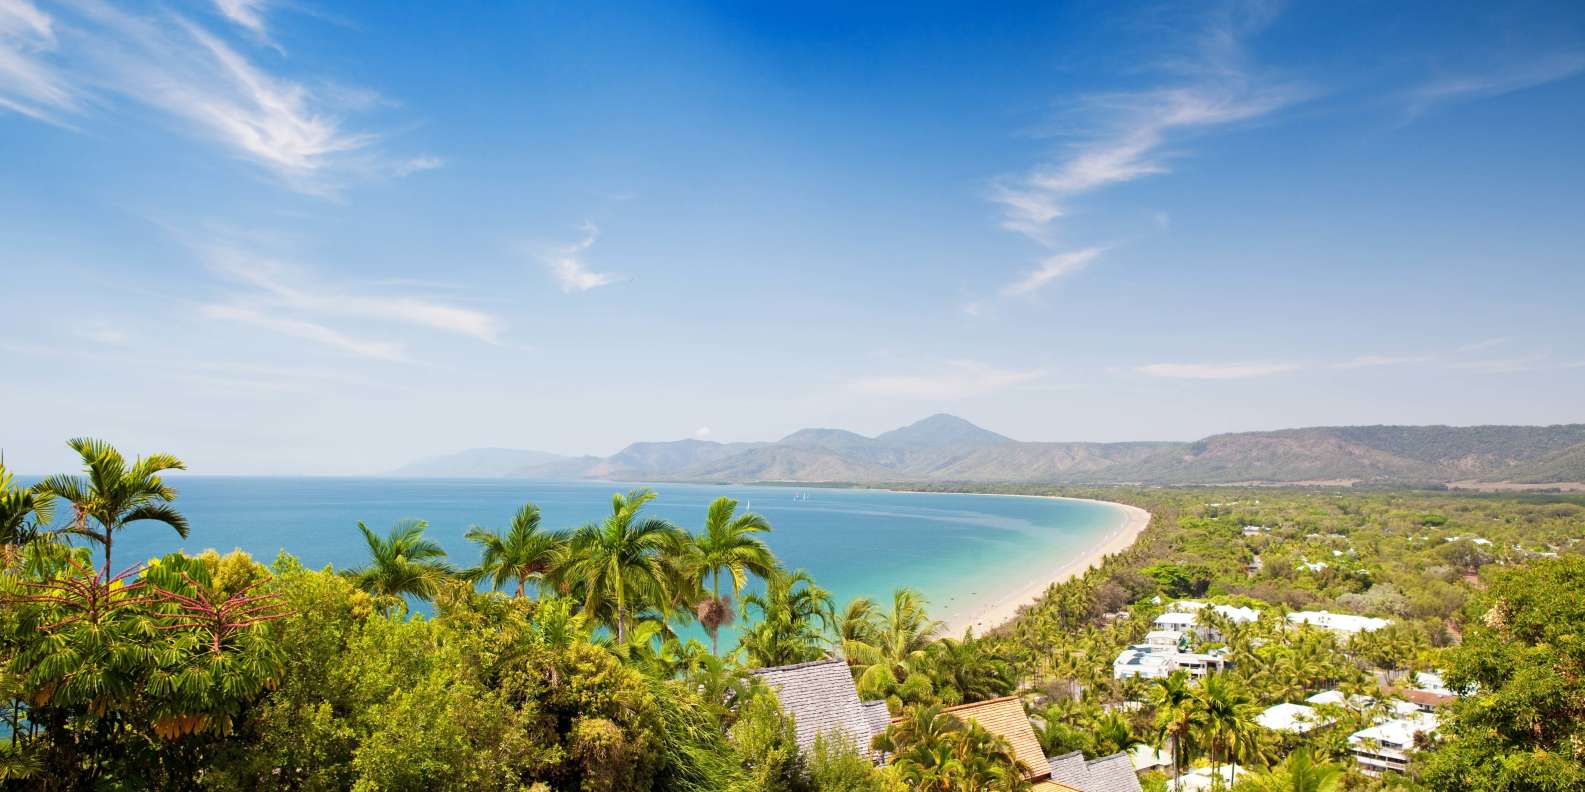 The BEST Port Douglas For first time visitors 2023 FREE Cancellation